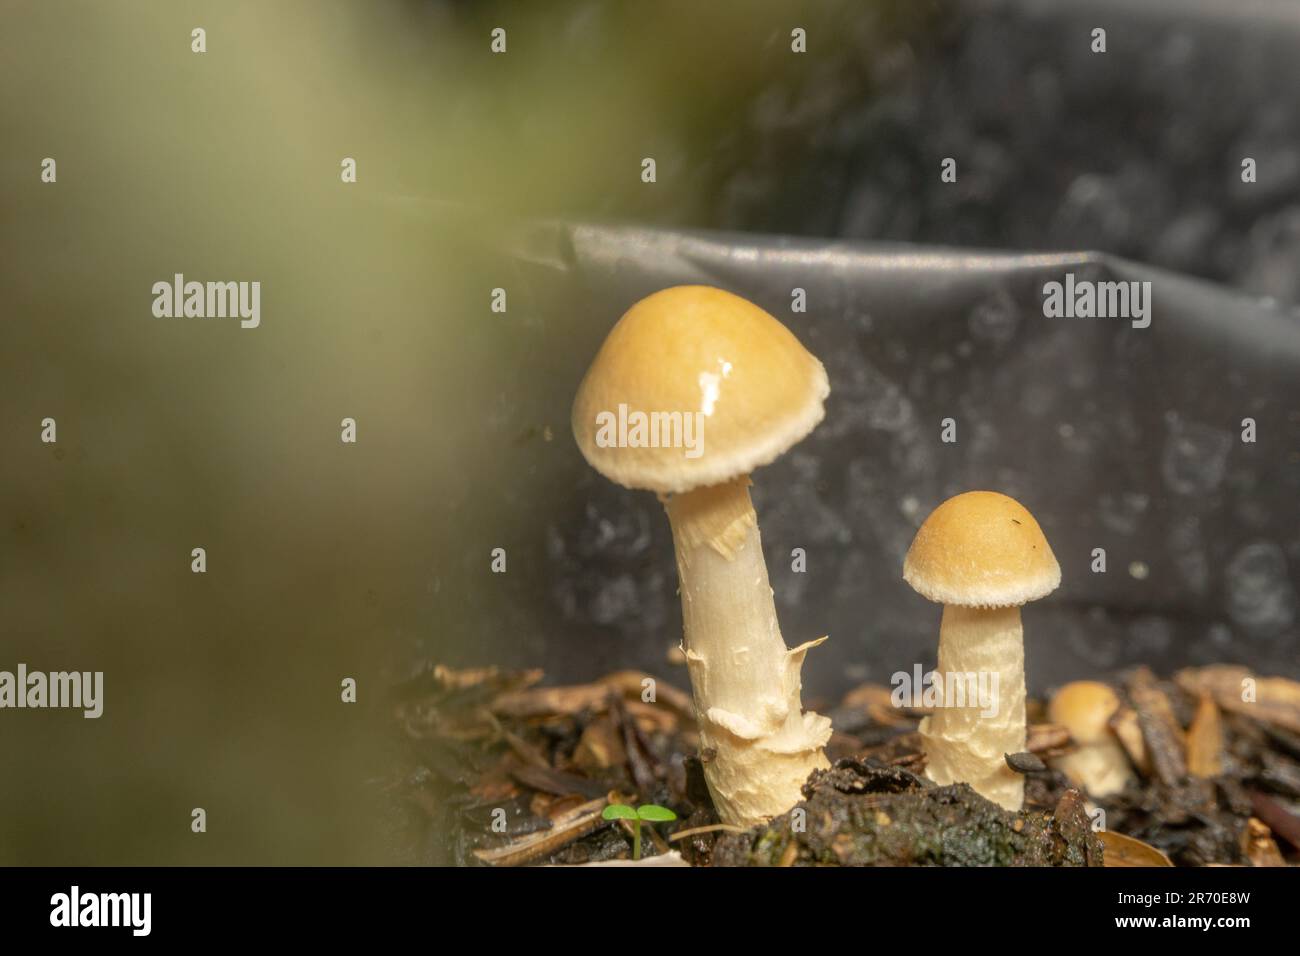 The Amanita Fulva also grow in the polybag of other plants. Amanita fulva, commonly called the tawny grisette or the orange-brown ringless amanita, is Stock Photo